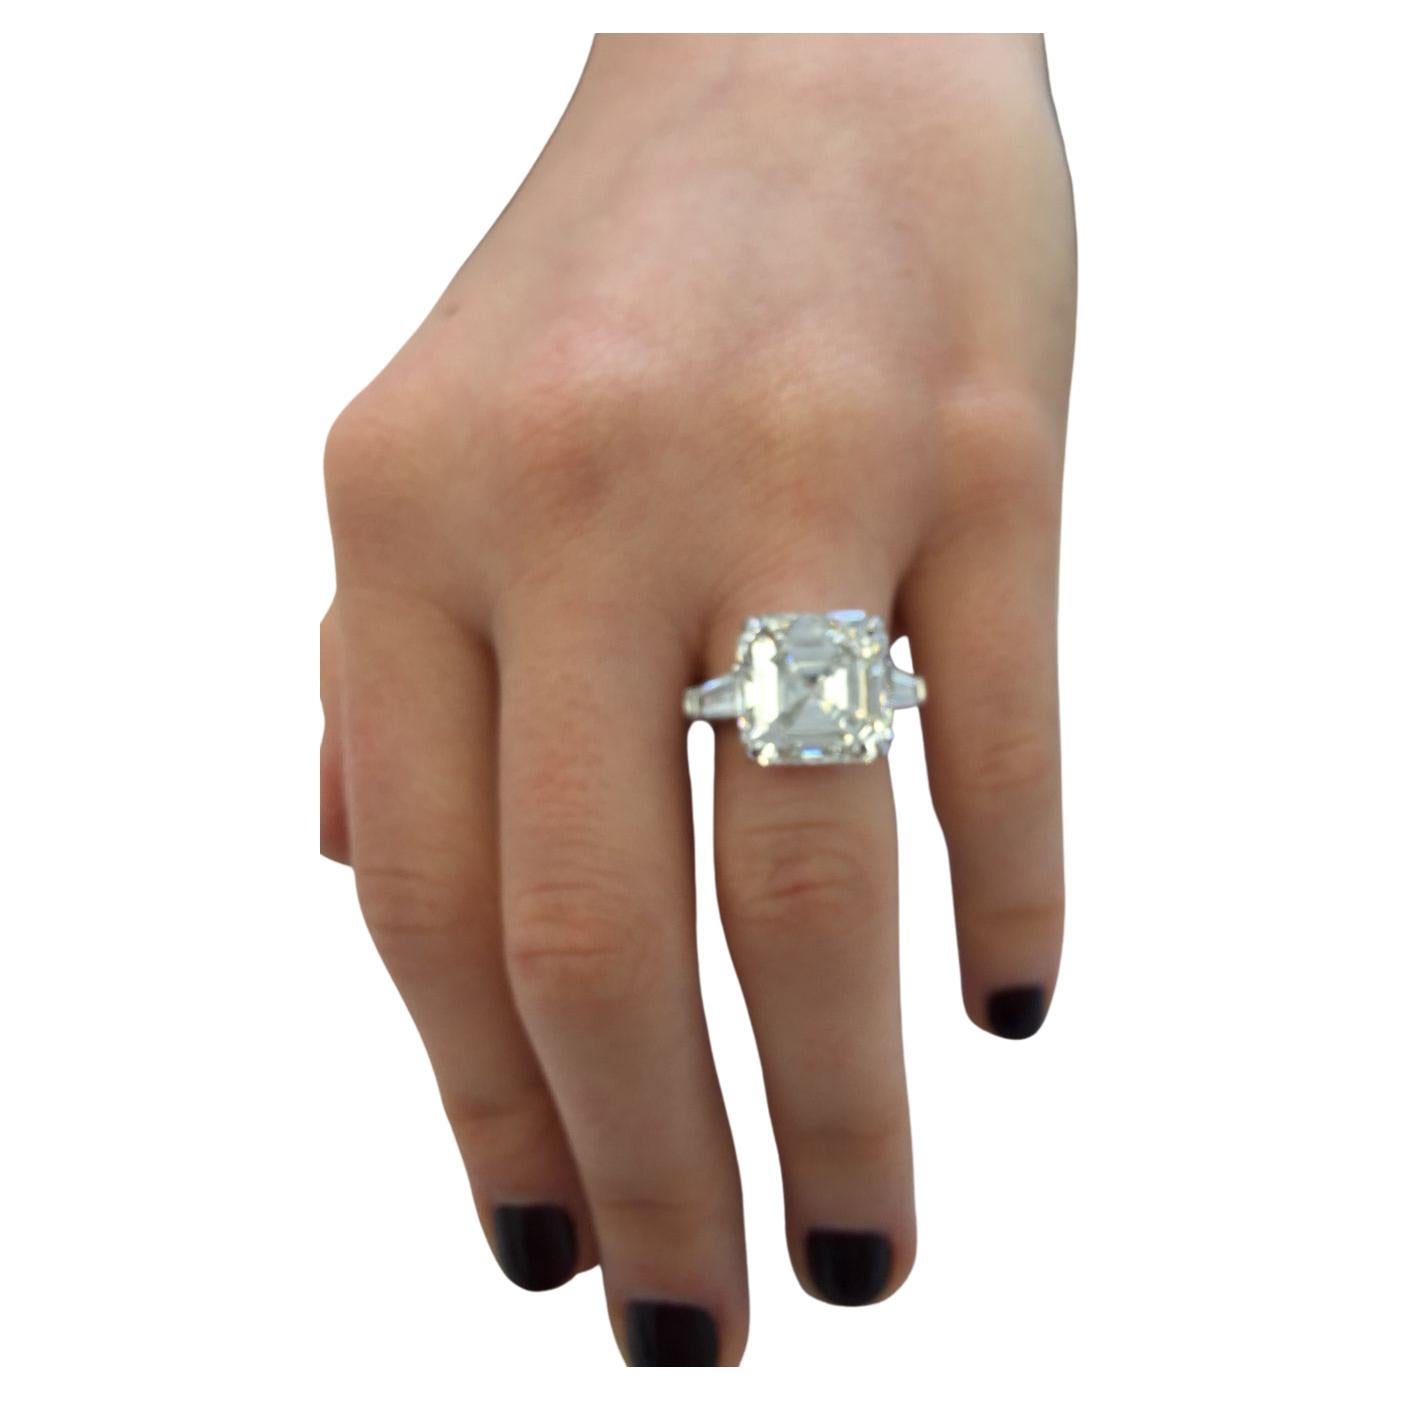 An amazing engagement solitaire ring with two side trapezoid diamonds at each side. The main stone is a white G color VVS2 Clarity and excellent polish and symmetry. None fluorescence